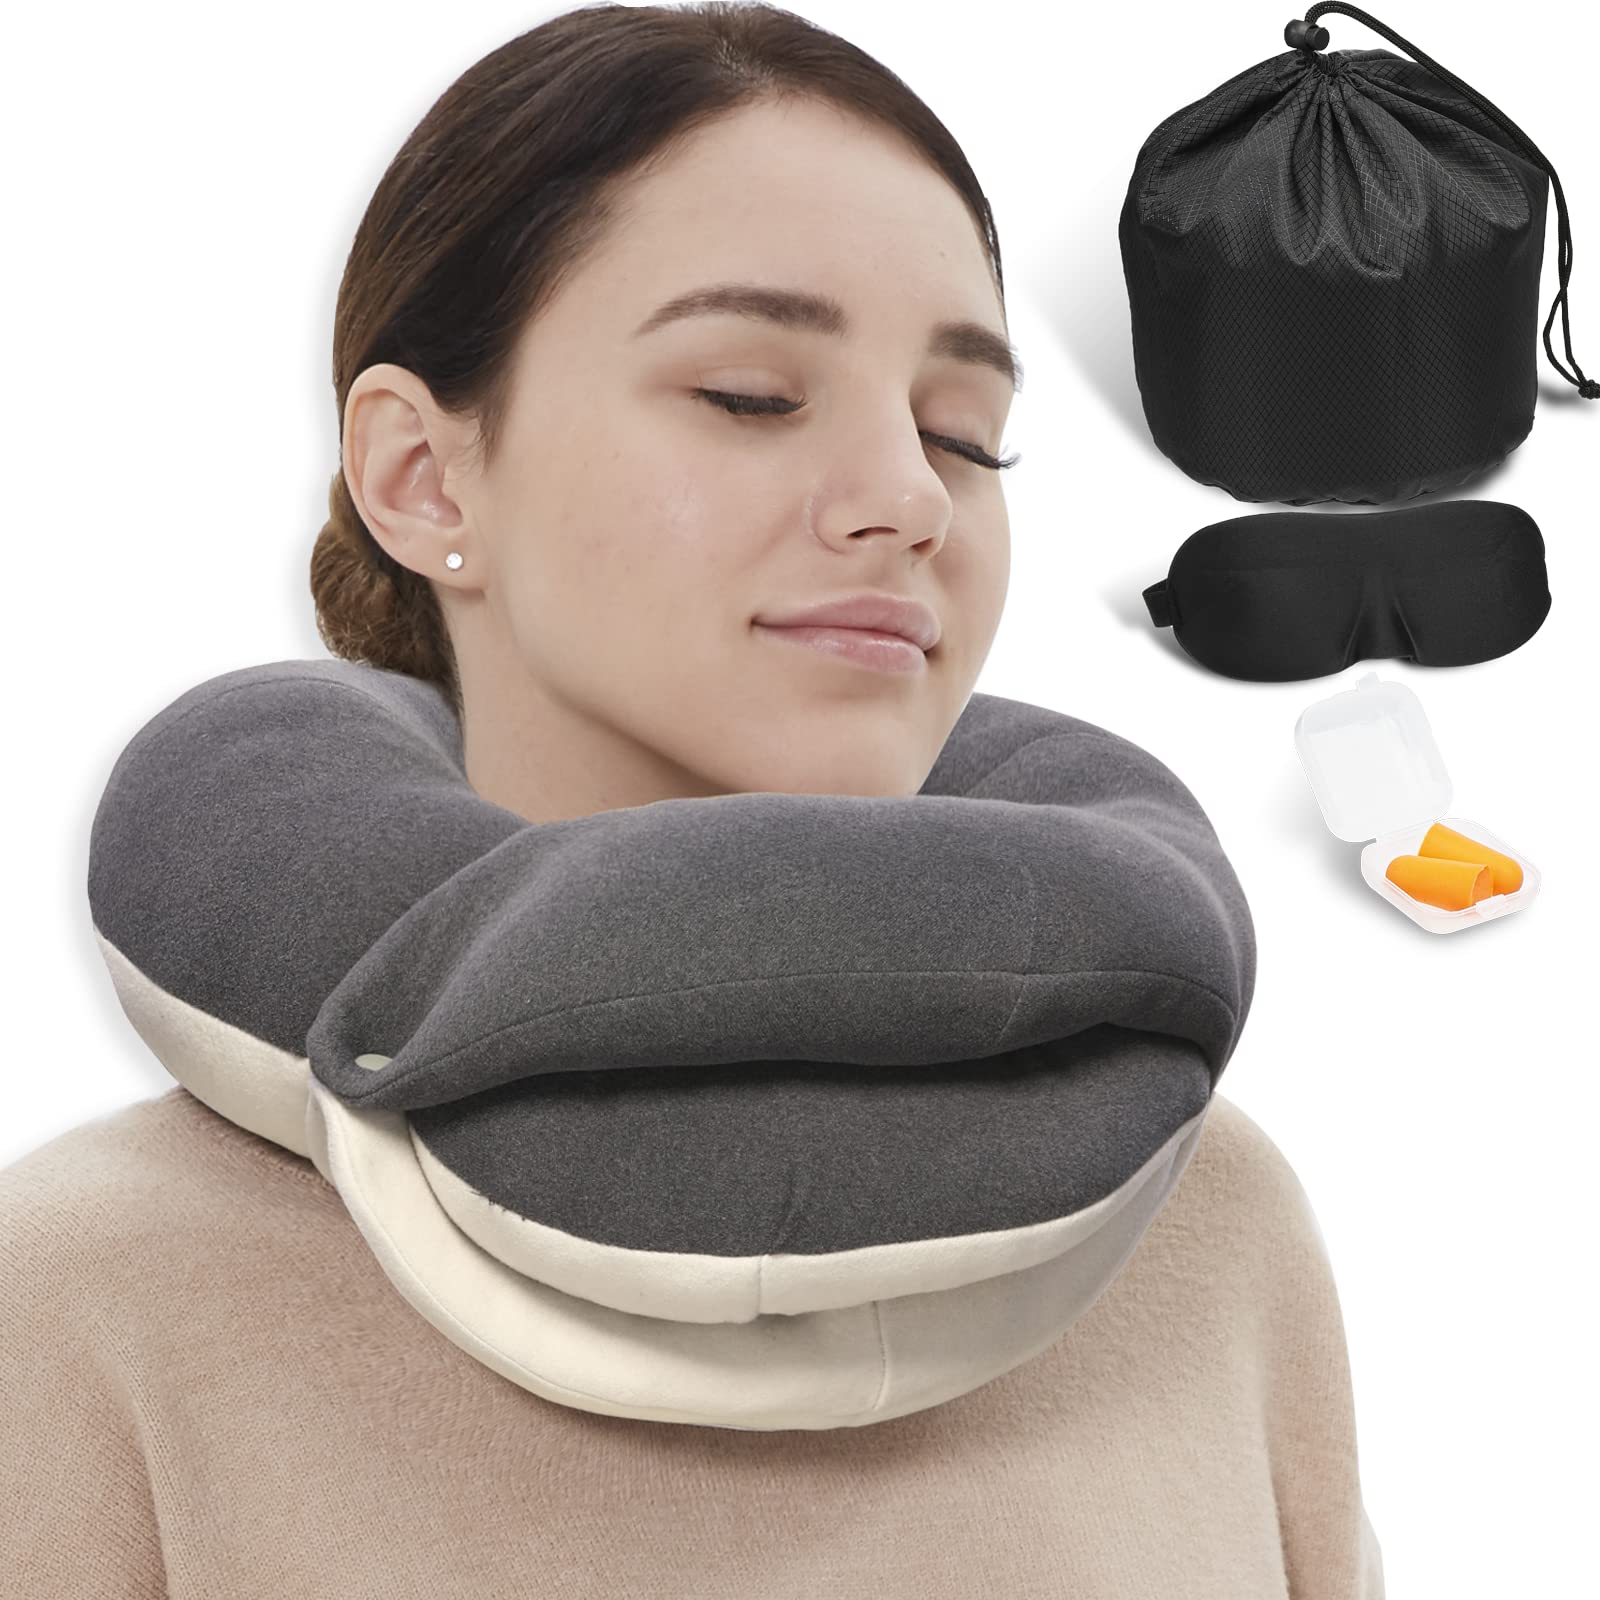 BUYUE Travel Neck Pillows for Airplanes 360 Head Support Sleeping Essentials for Long Flight Skin-Friendly Breathable